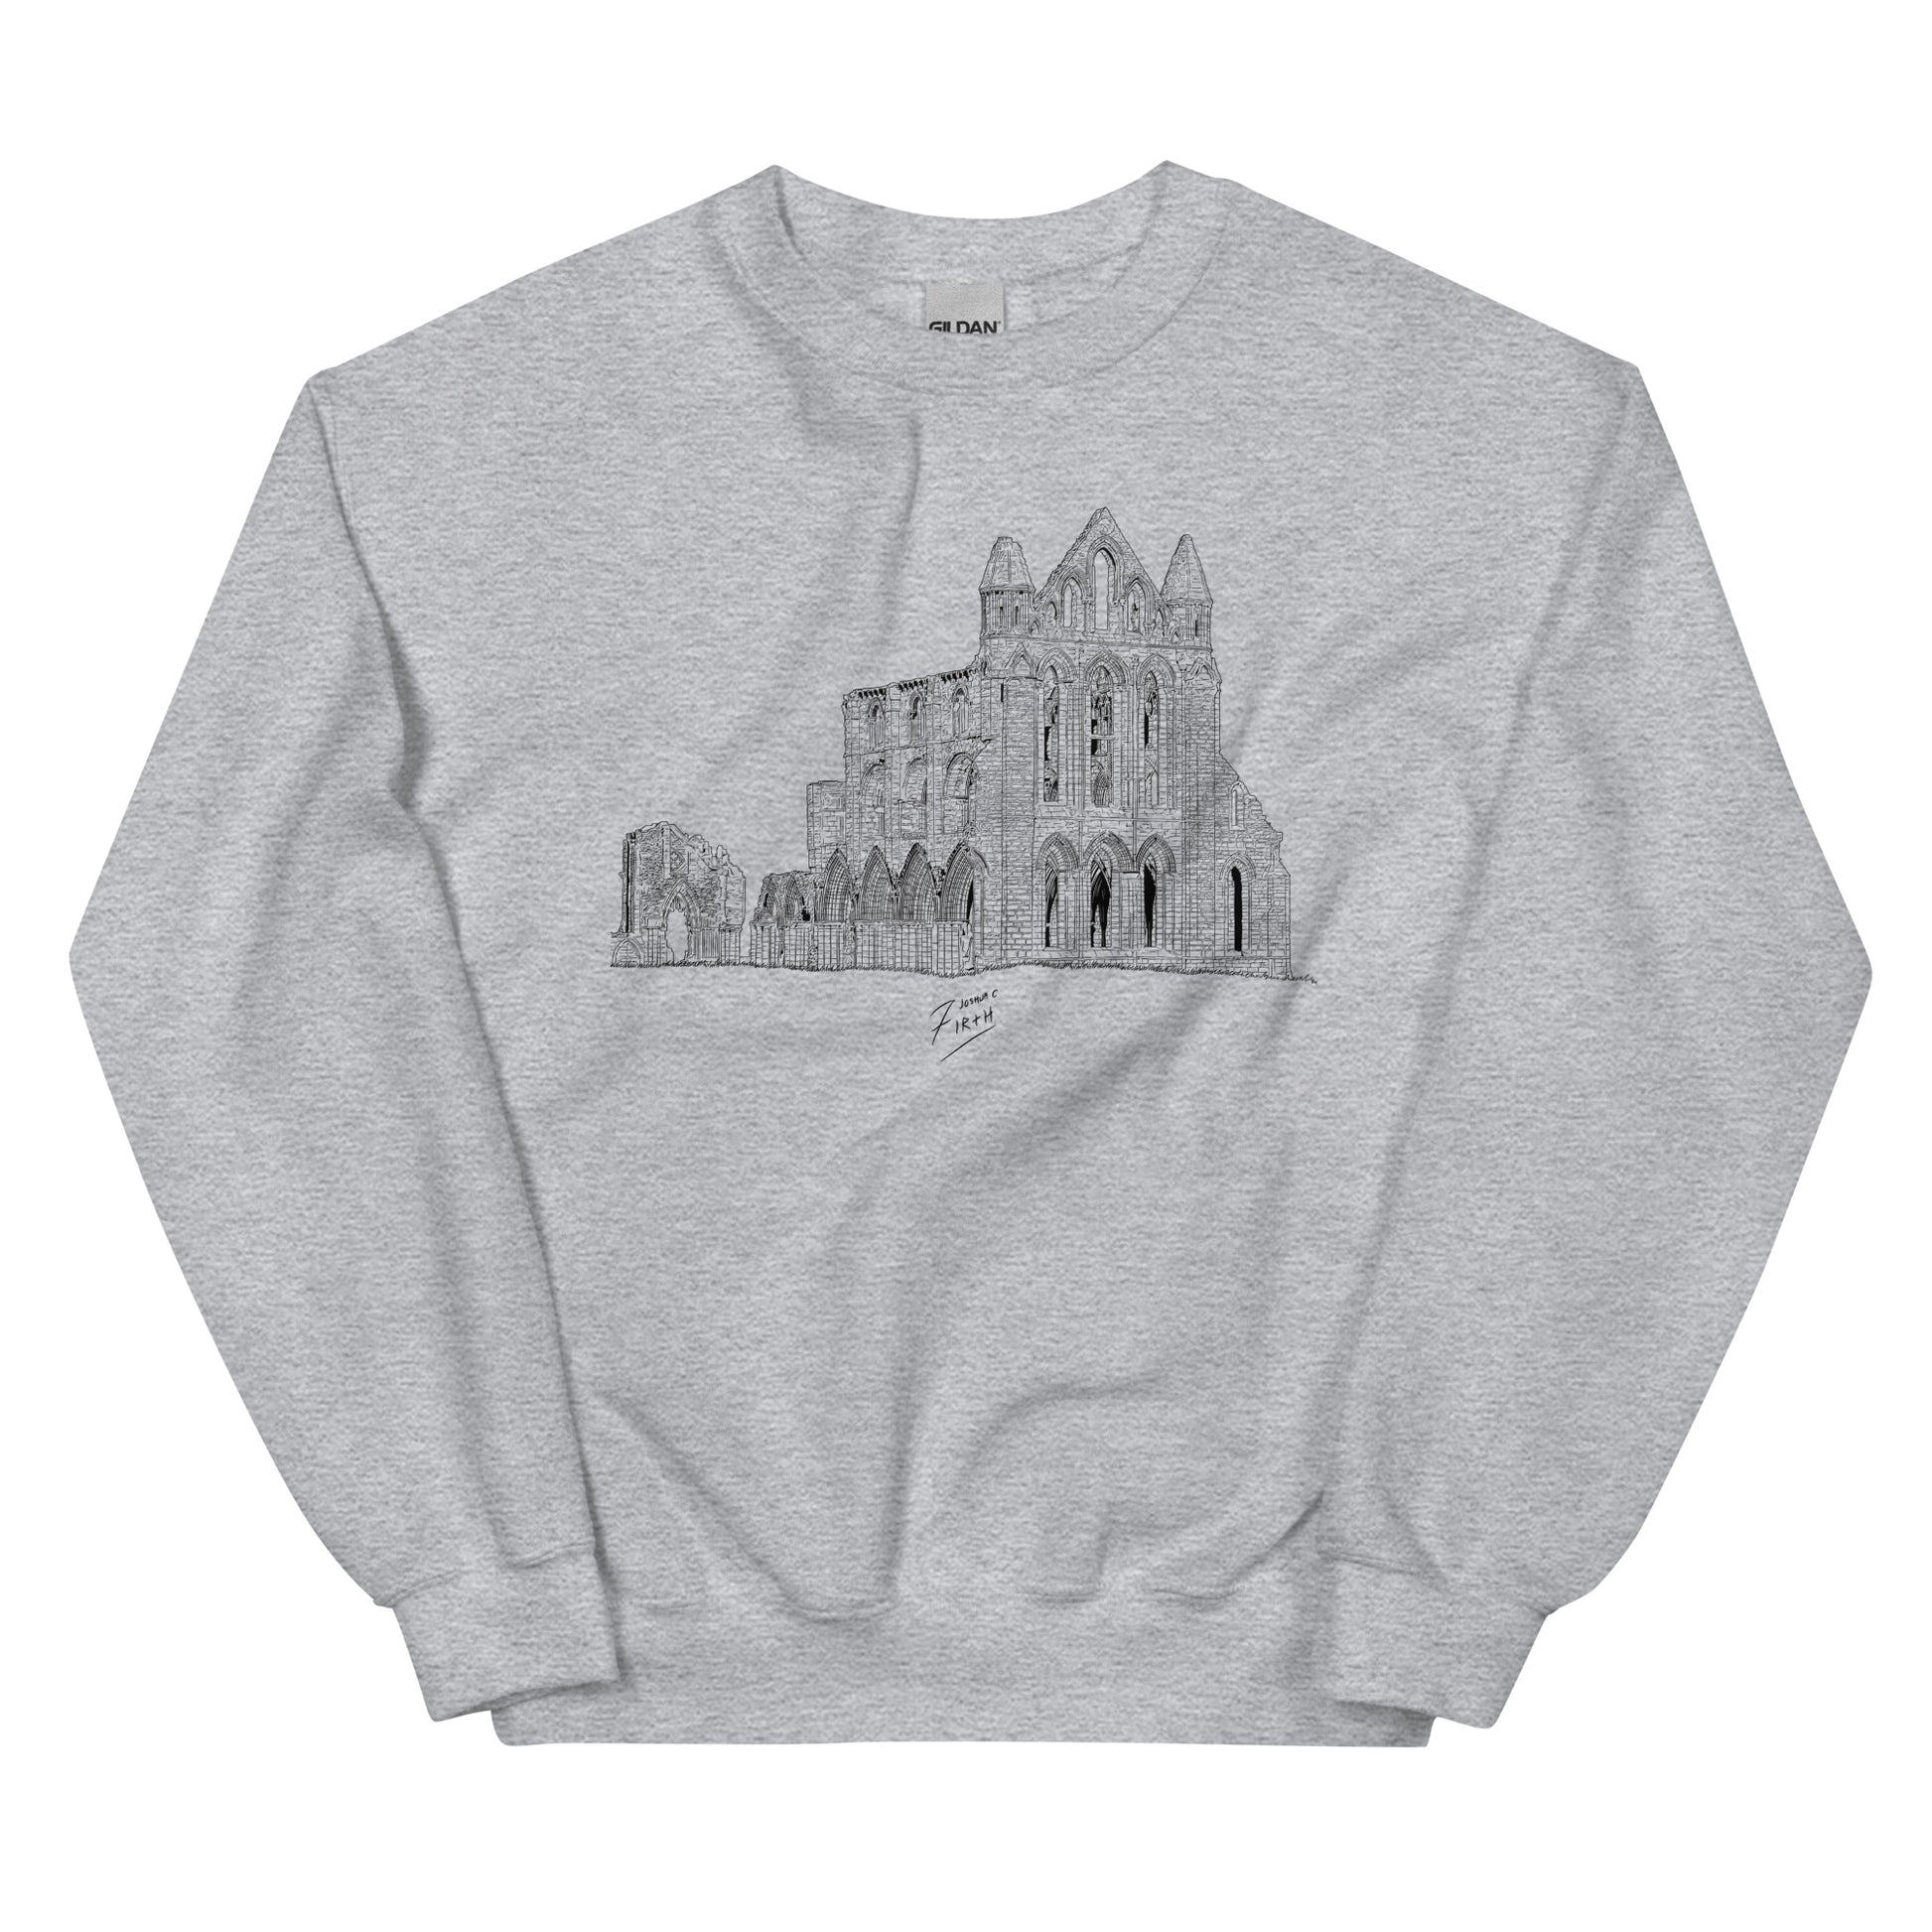 Whitby Abbey, North Yorkshire themed sweatshirt jumper. Grey colour